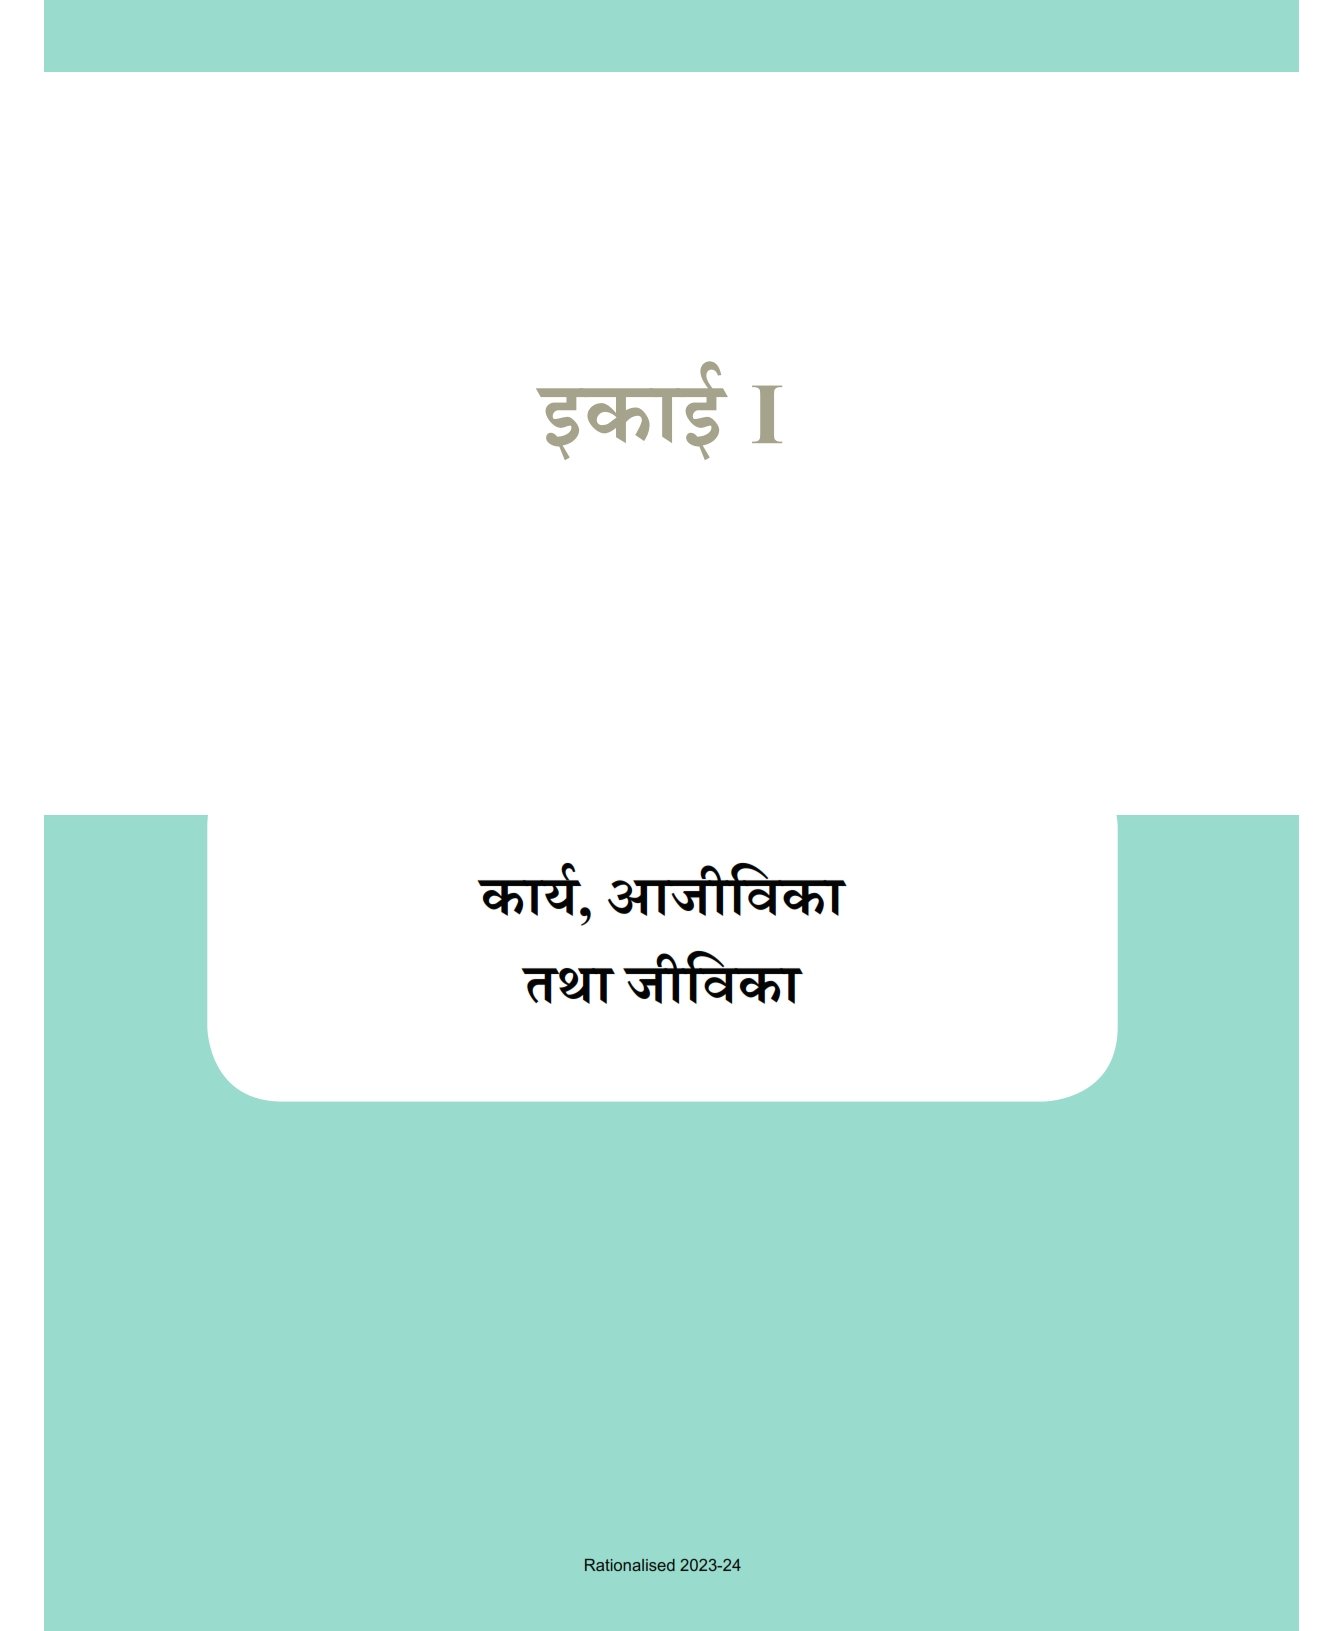 NCERT Book Class 12 Home Science (परिवार विज्ञान) All Chapters - Page 1